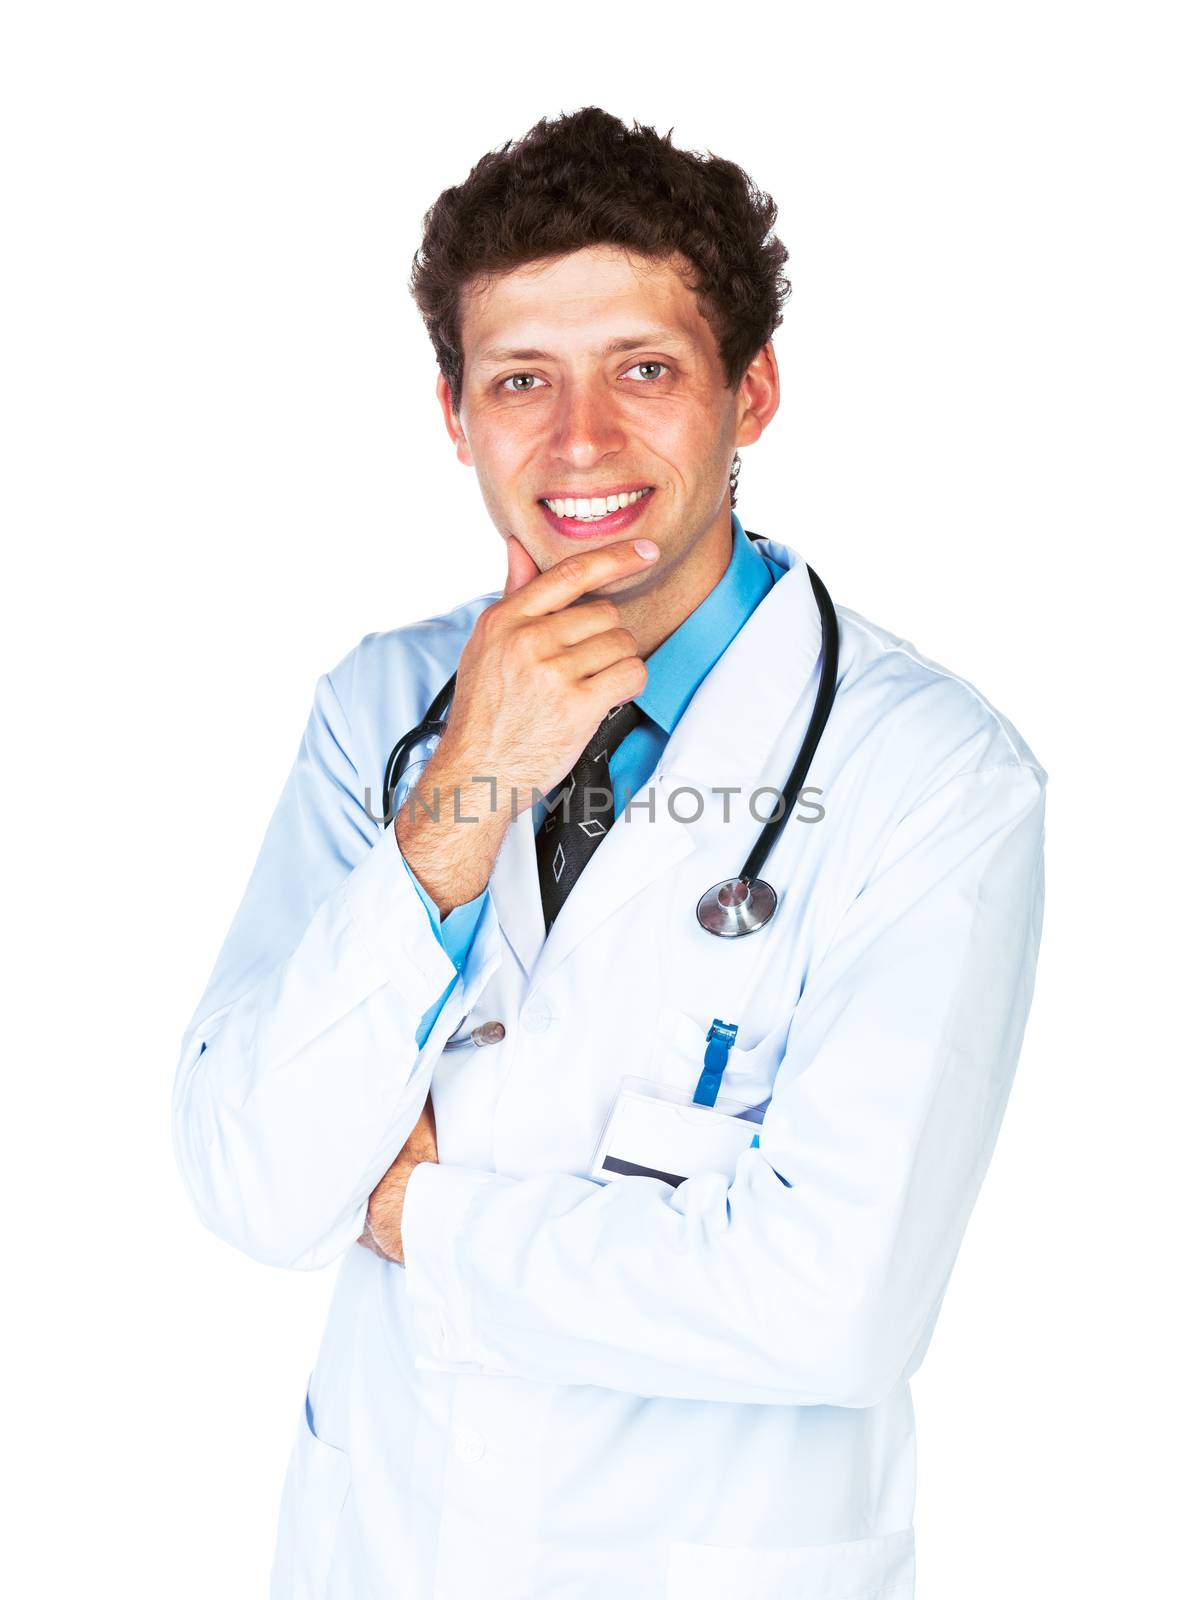 Portrait of the smiling doctor on a white background